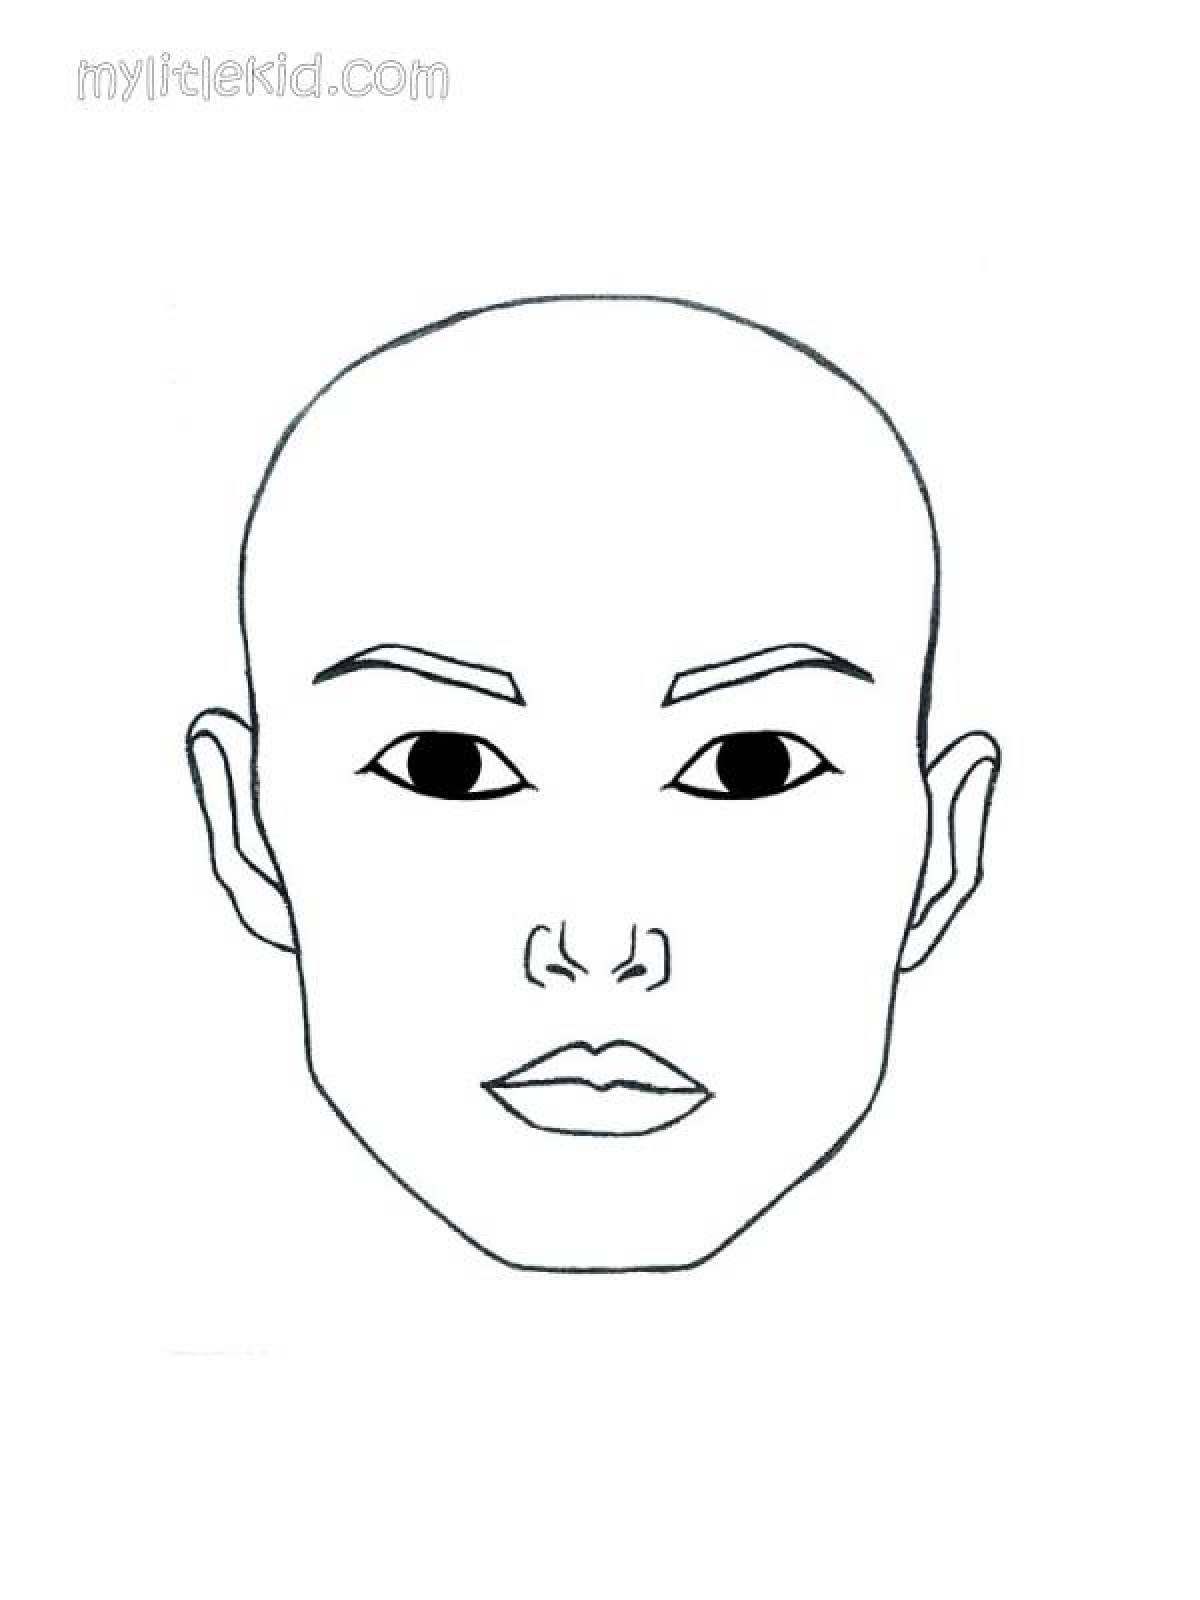 Playful human face coloring page